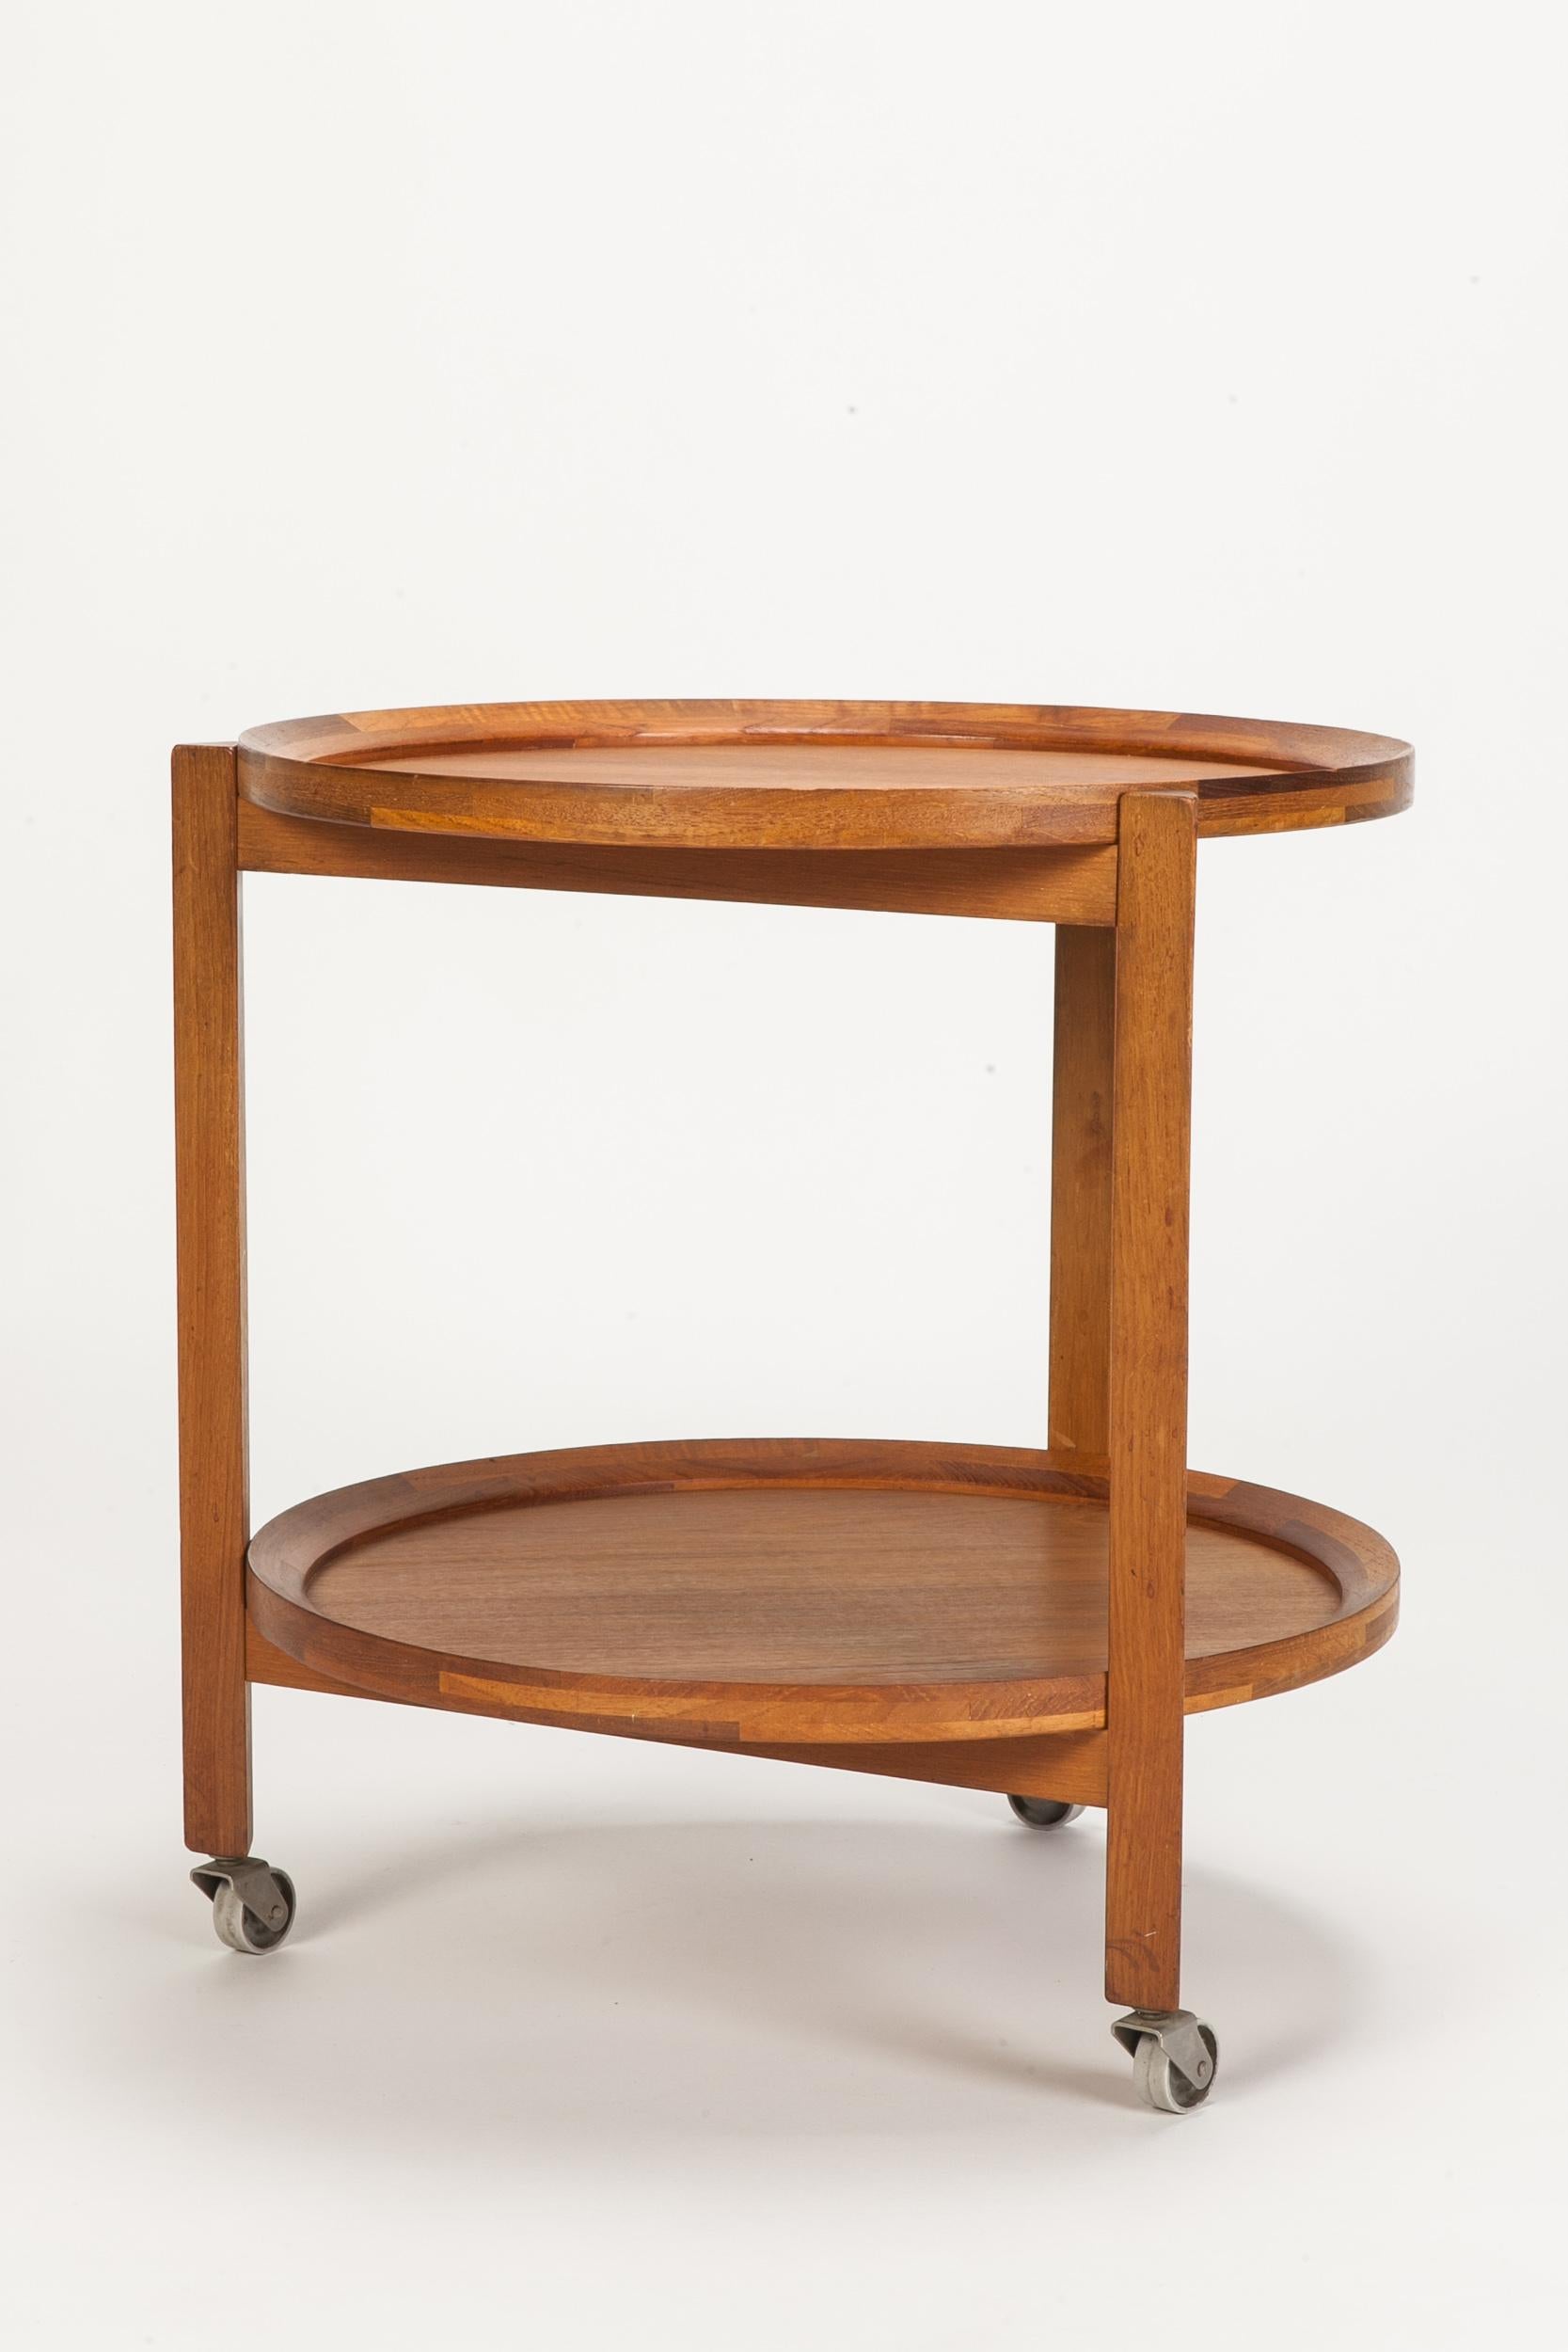 Lovely round teak wood service trolley on wheels. Trays are removable.